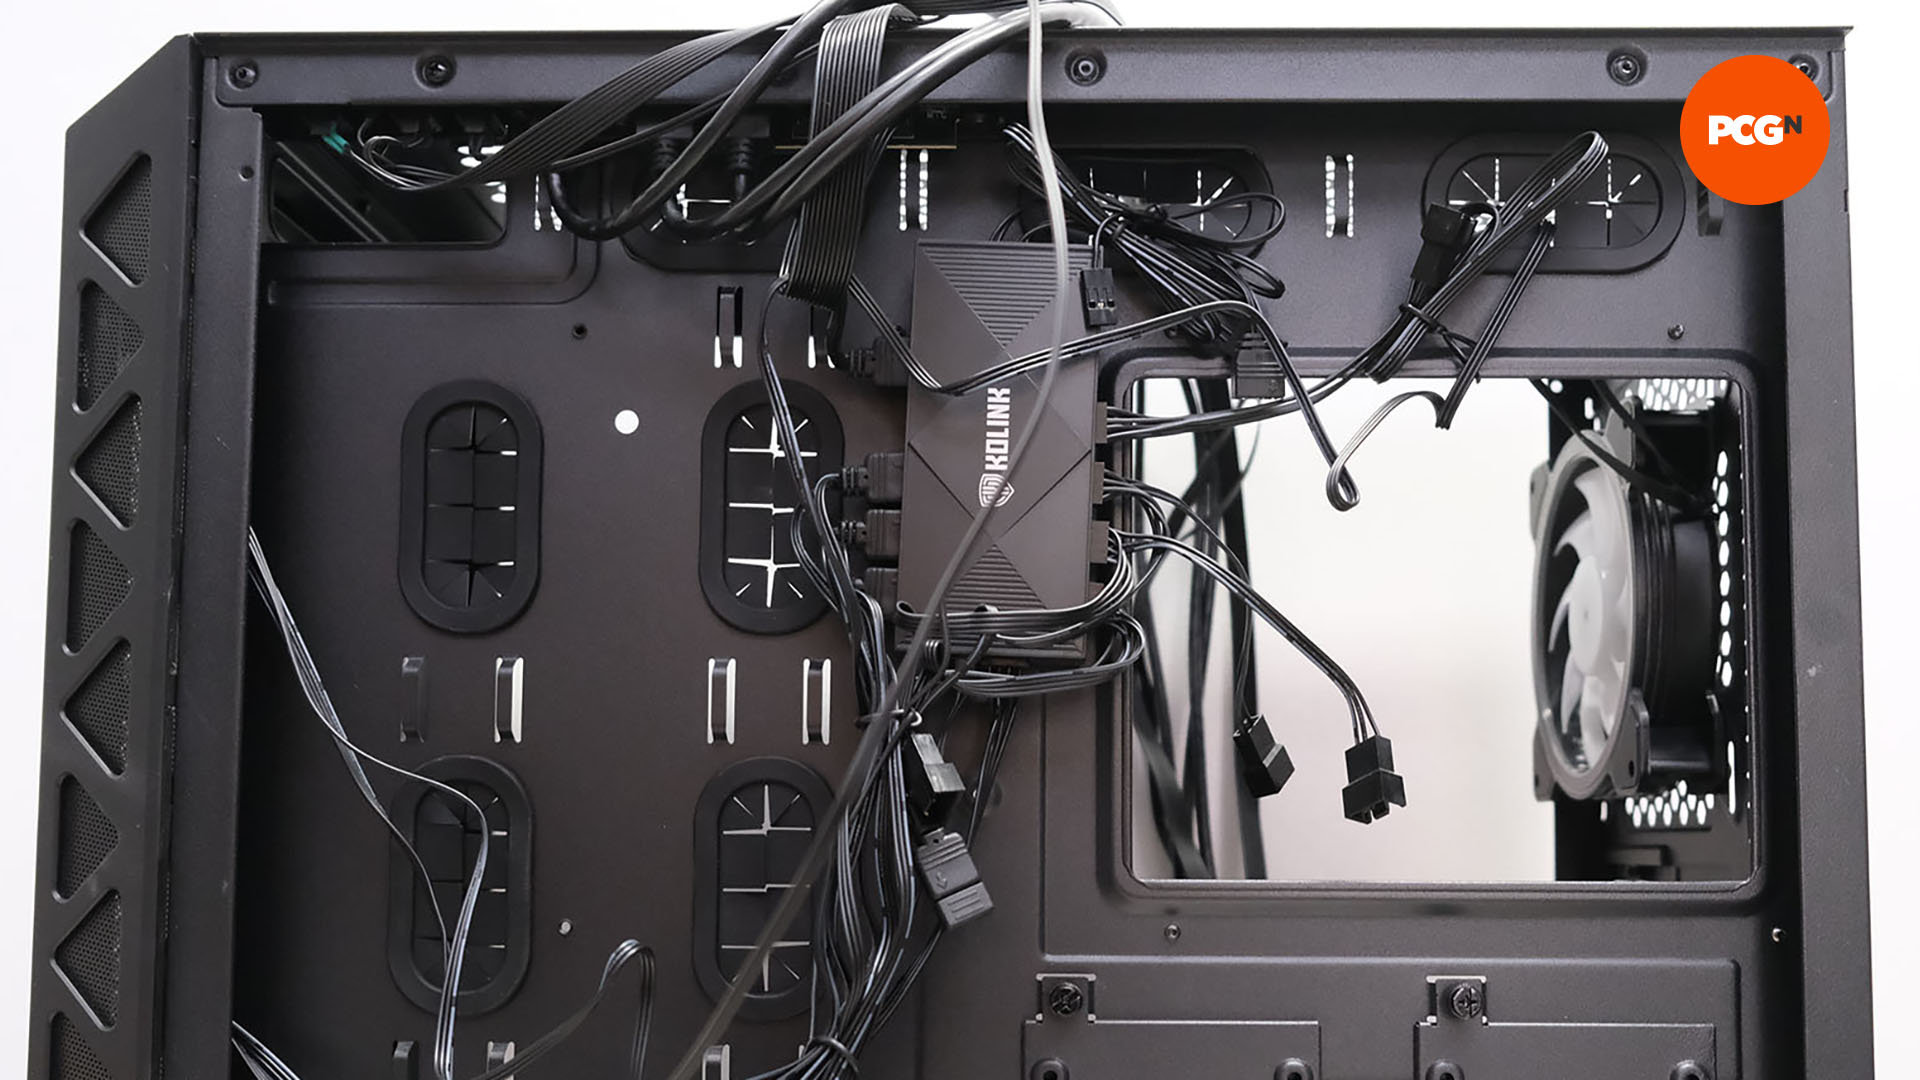 How to build a gaming PC: Look at case and cables